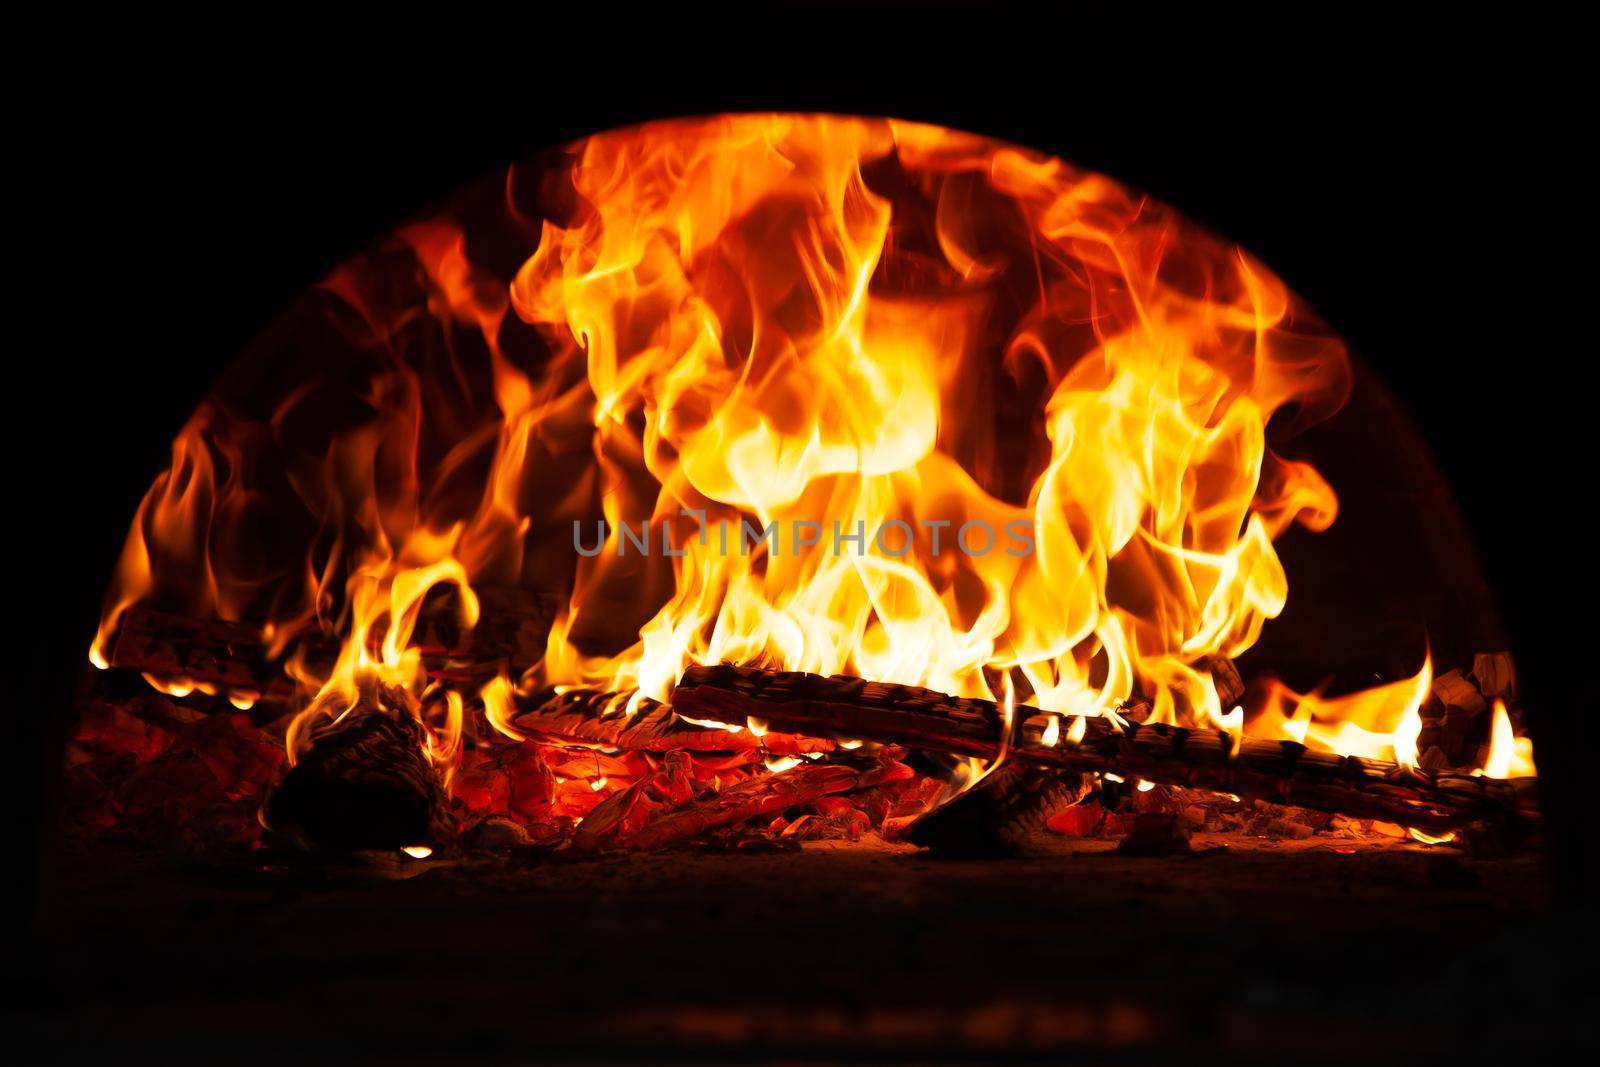 Hot flame of fire in oven. Warm evening by the fireplace